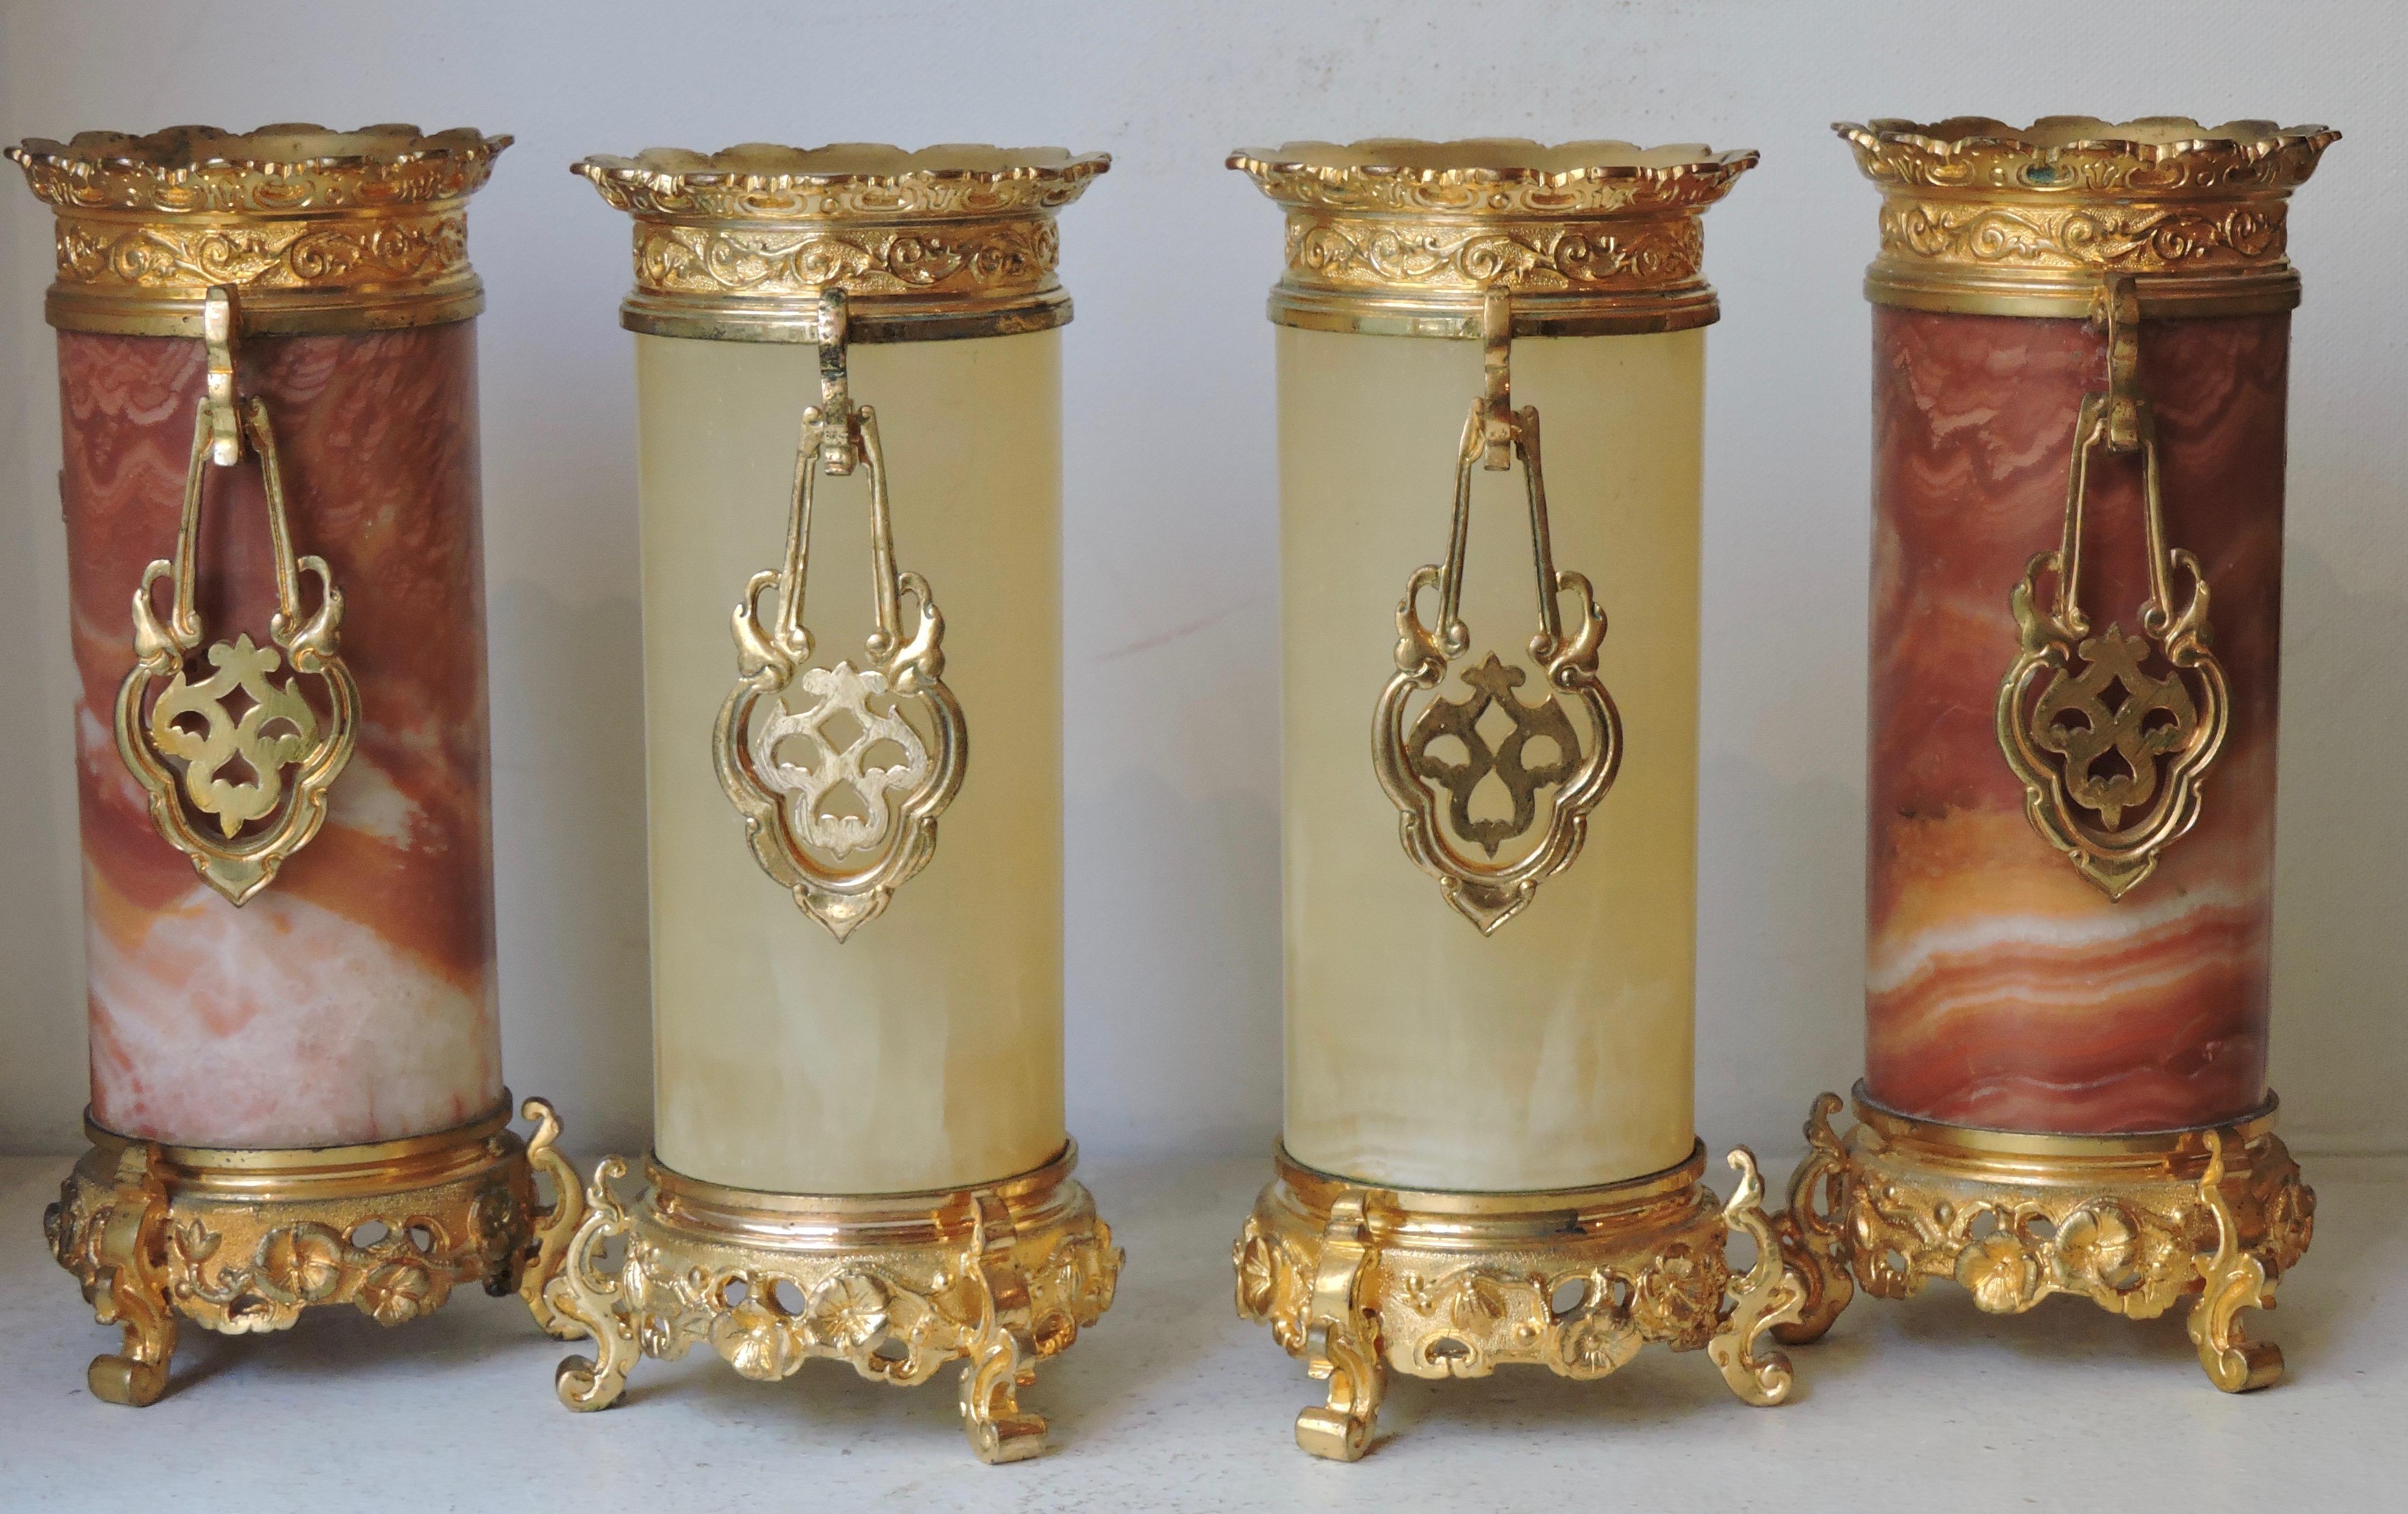 Set of 4 Japonisme Marble, Onyx and Ormolu Vases in the Style of Edouard Lièvre (Französisch)